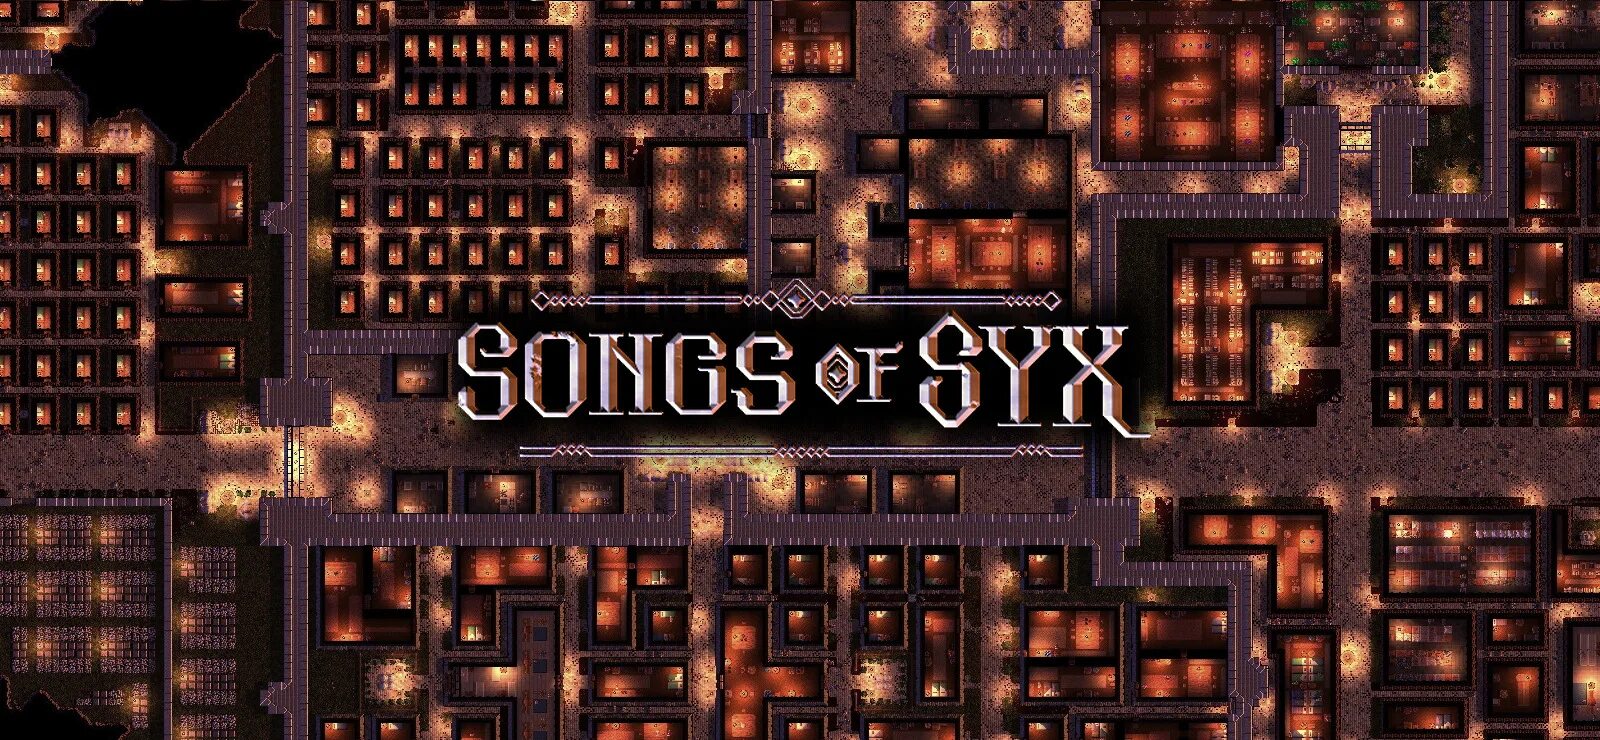 Songs of syx русификатор. Songs of syx. Songs of syx города. Songs of syx планировка. Songs of syx постройки.